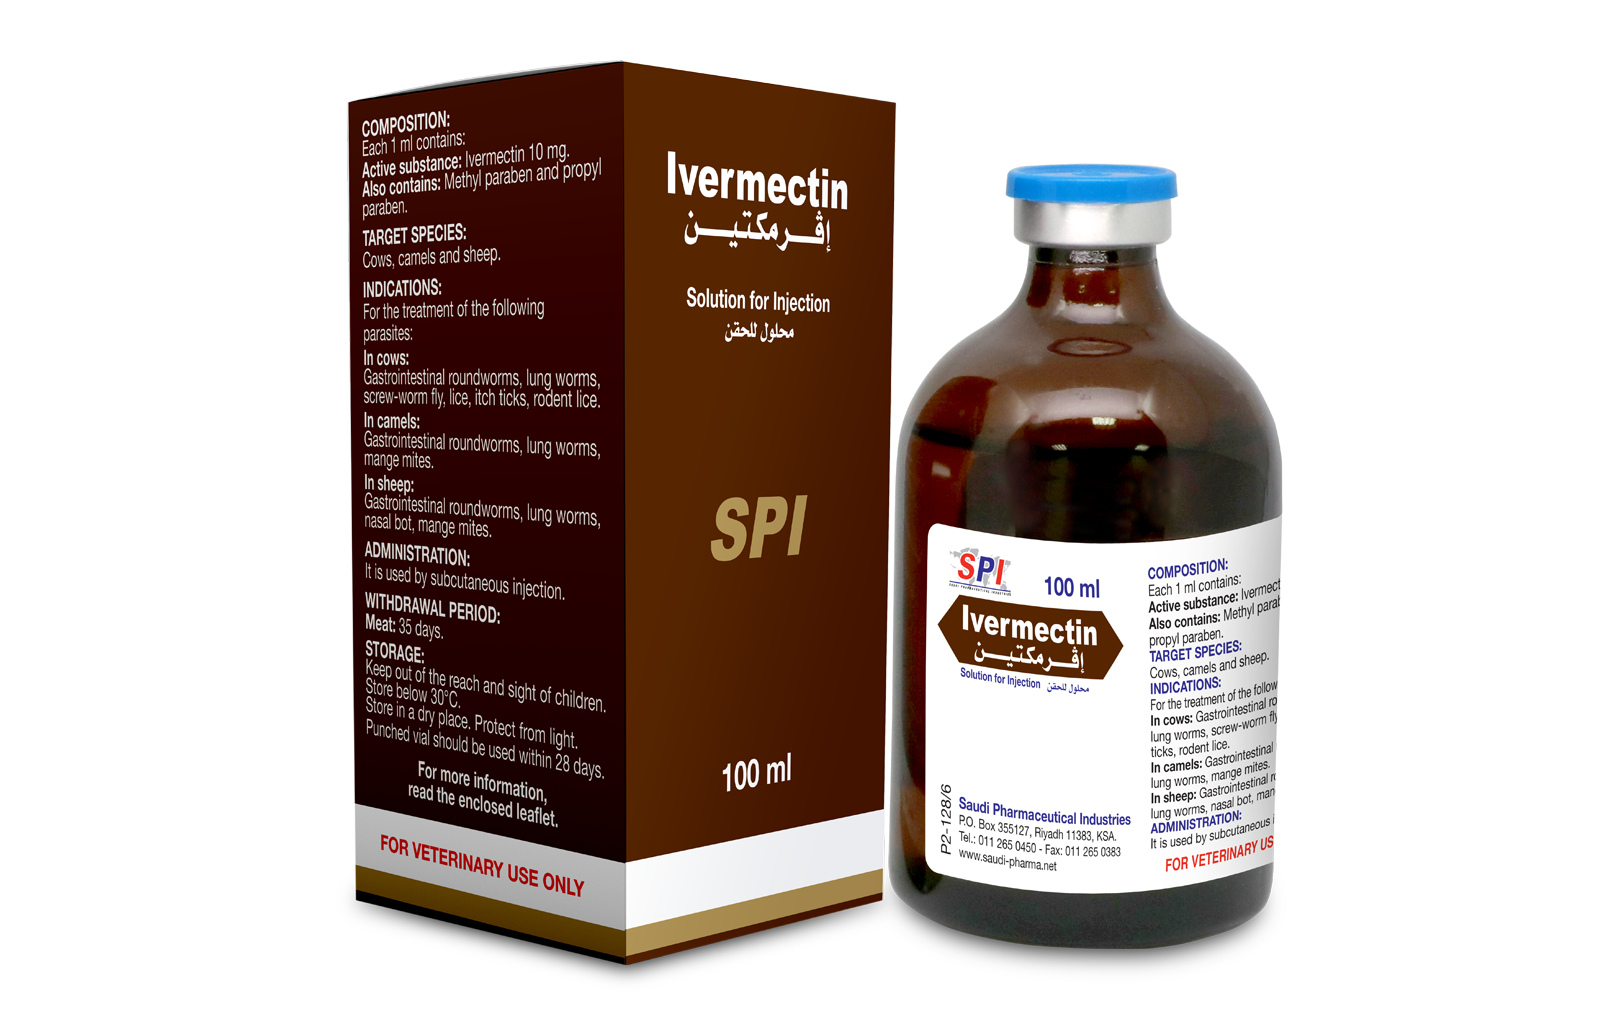 Ivermectin 1% Solution for Injection (100 ml)